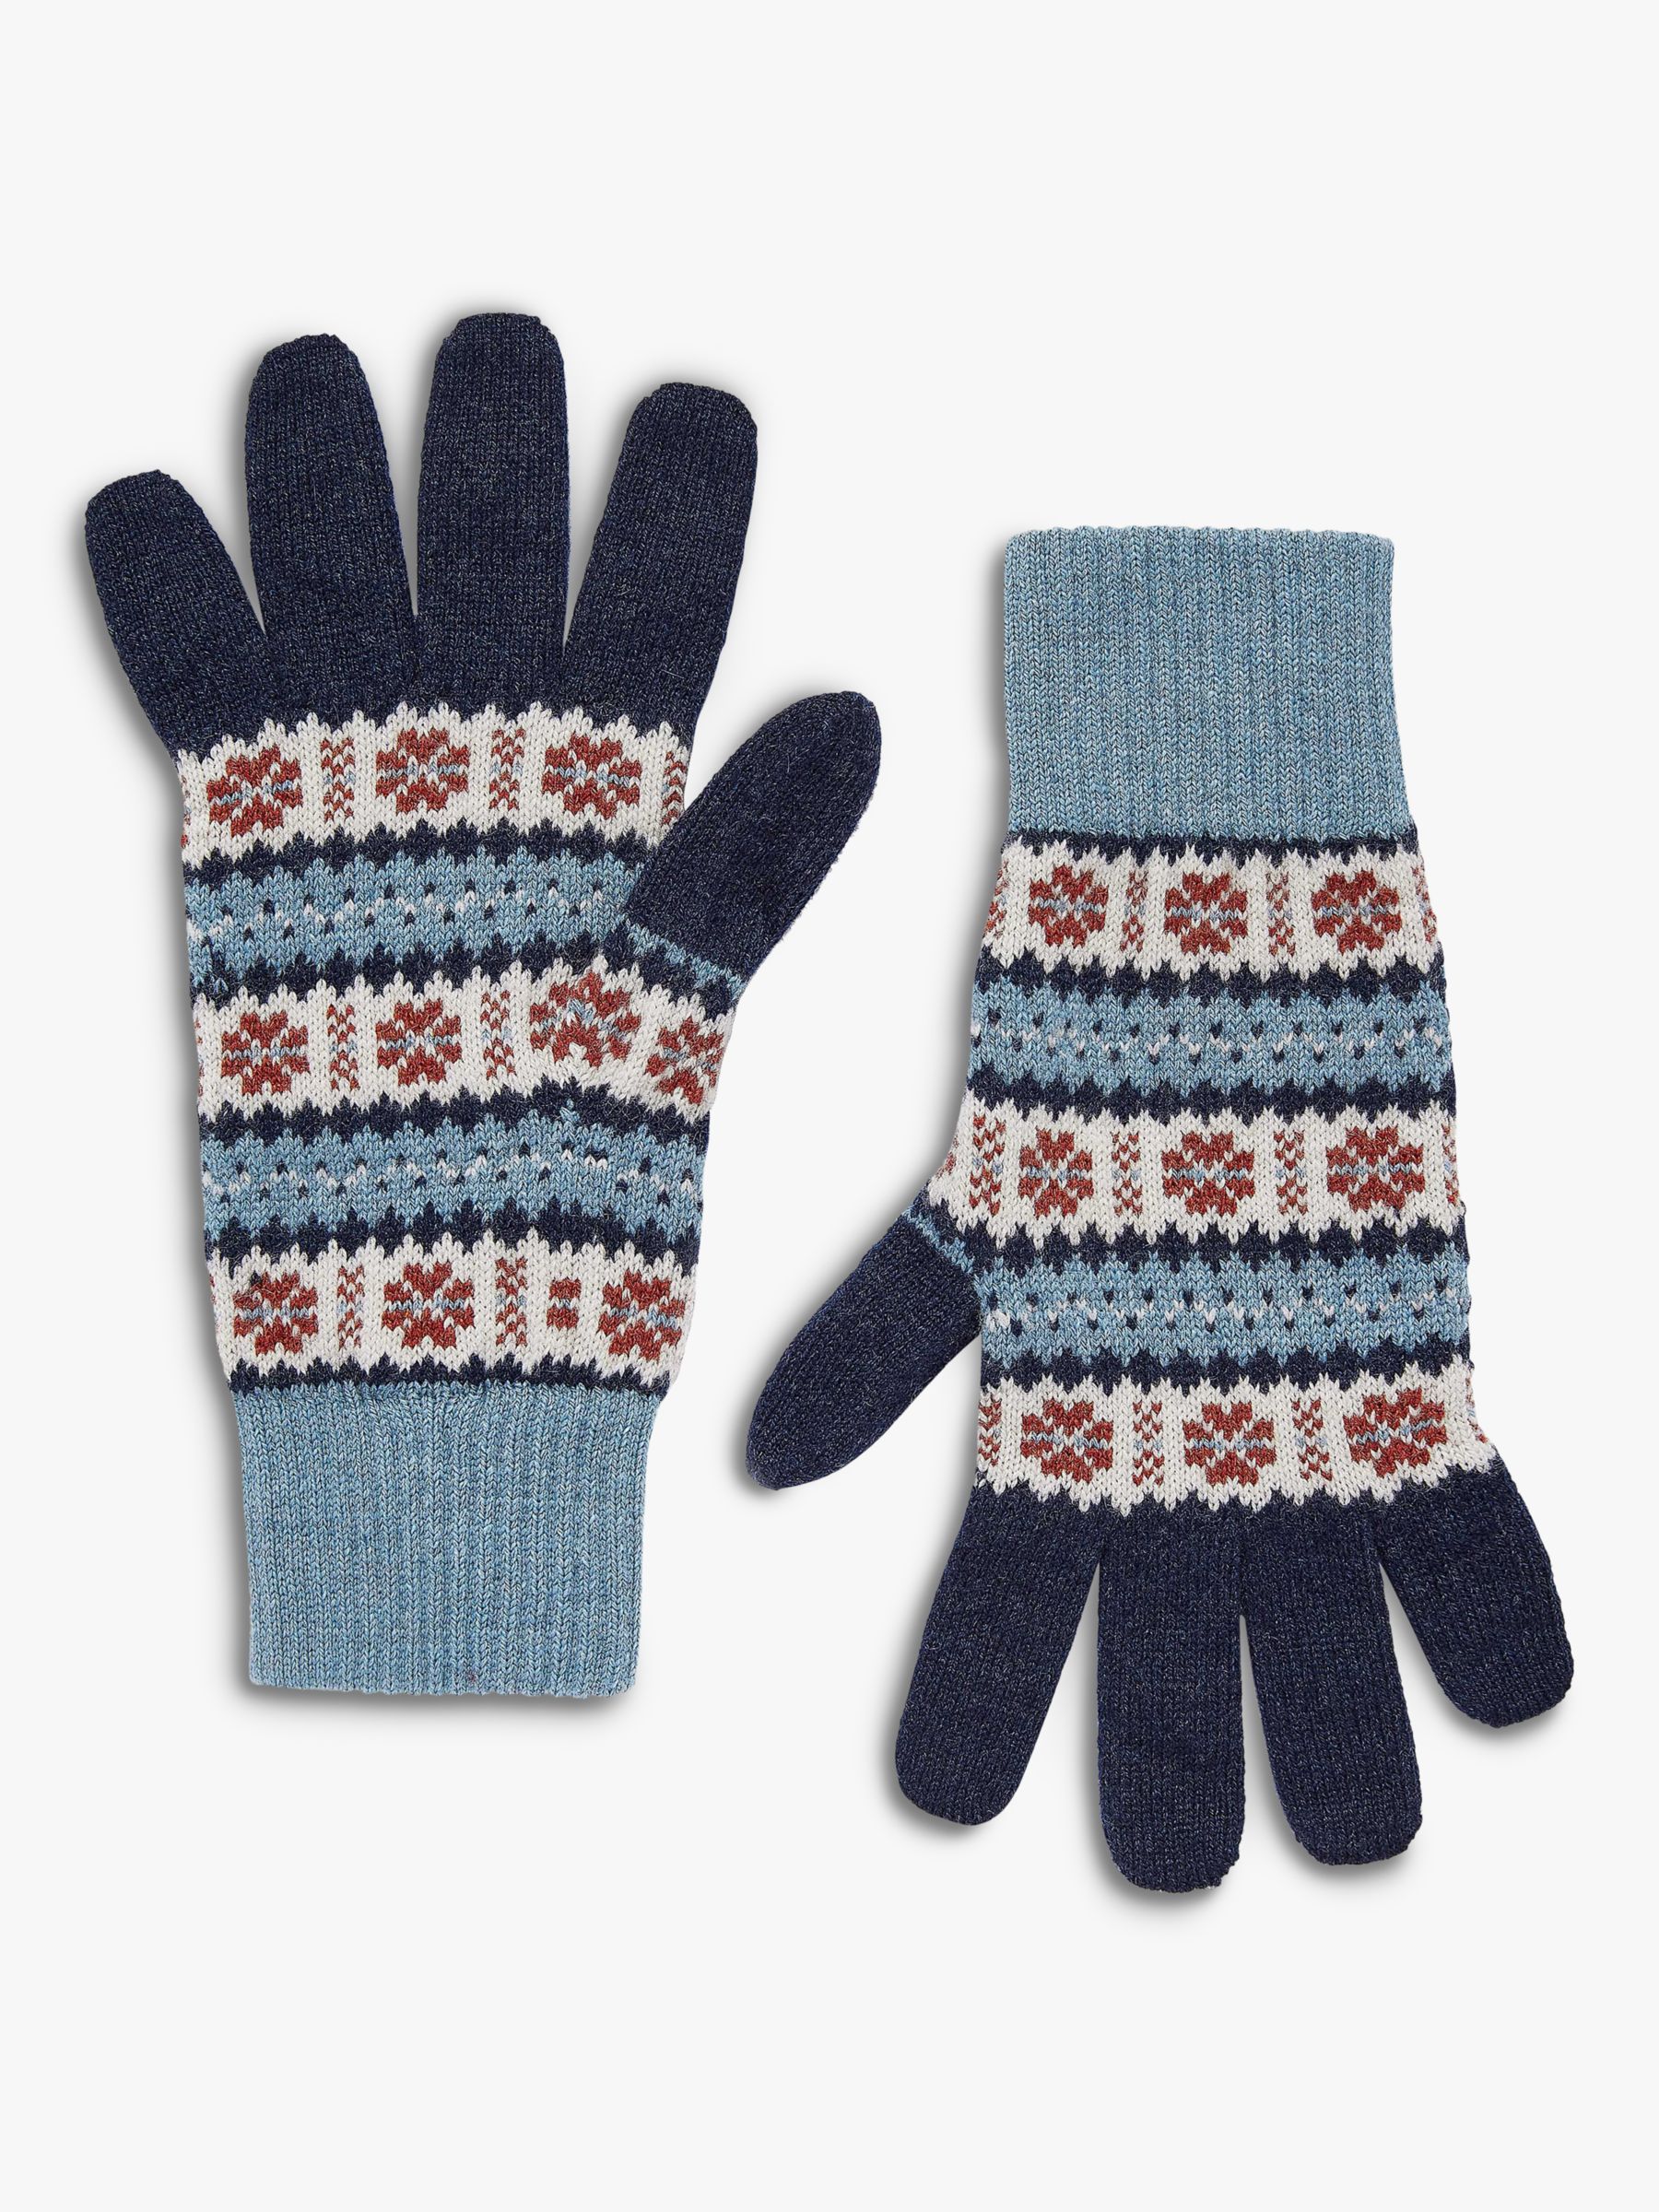 Brora Fair Isle Cashmere Gloves, French Navy/Mist at John Lewis & Partners